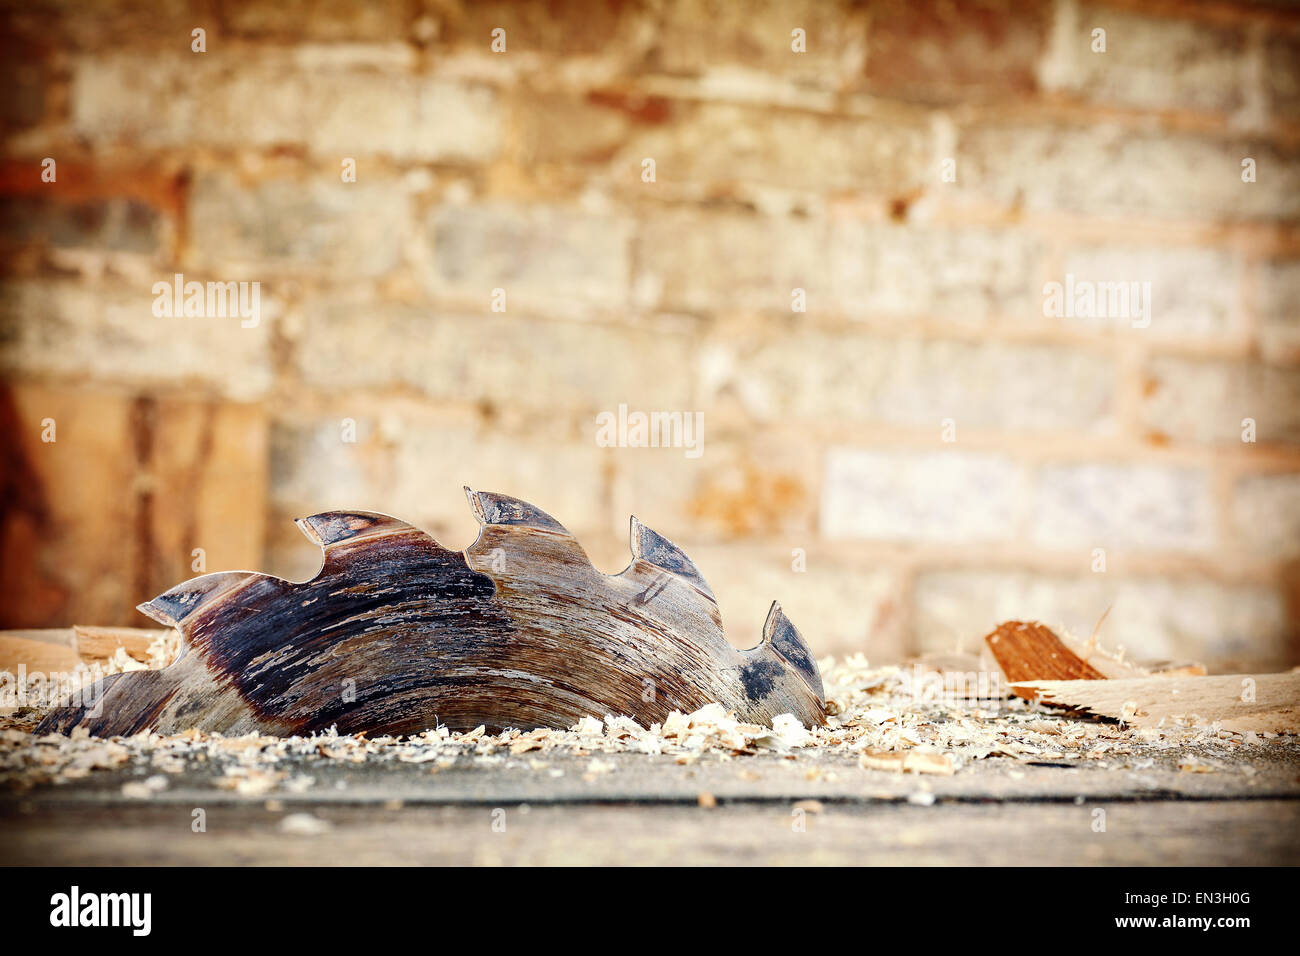 Retro stylized old circular saw in carpenter's shop, space for text. Stock Photo